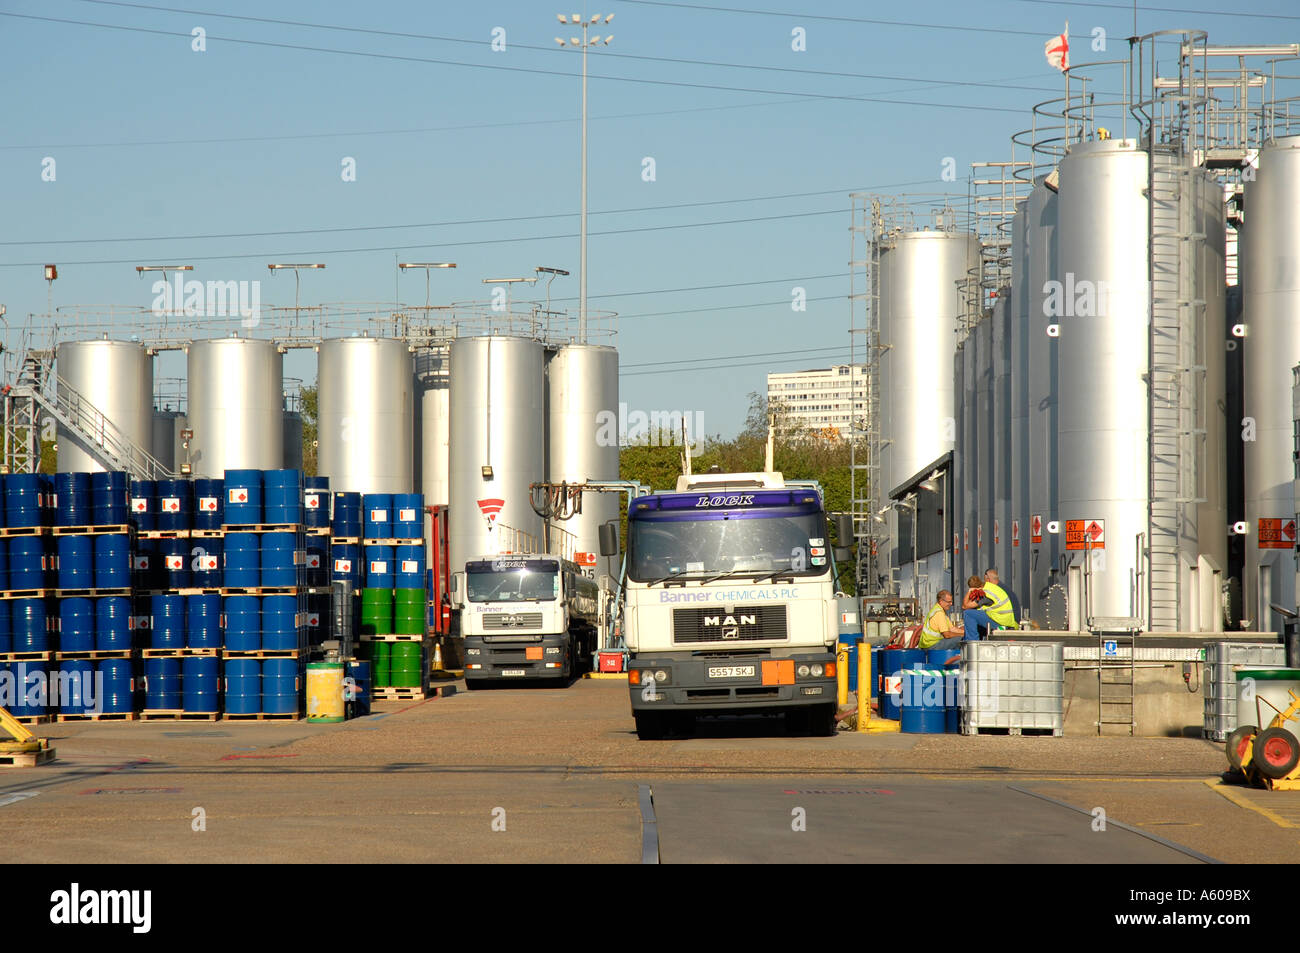 Tanker depot in Stratford London in the area of the site of the 2012 Olympics Stock Photo